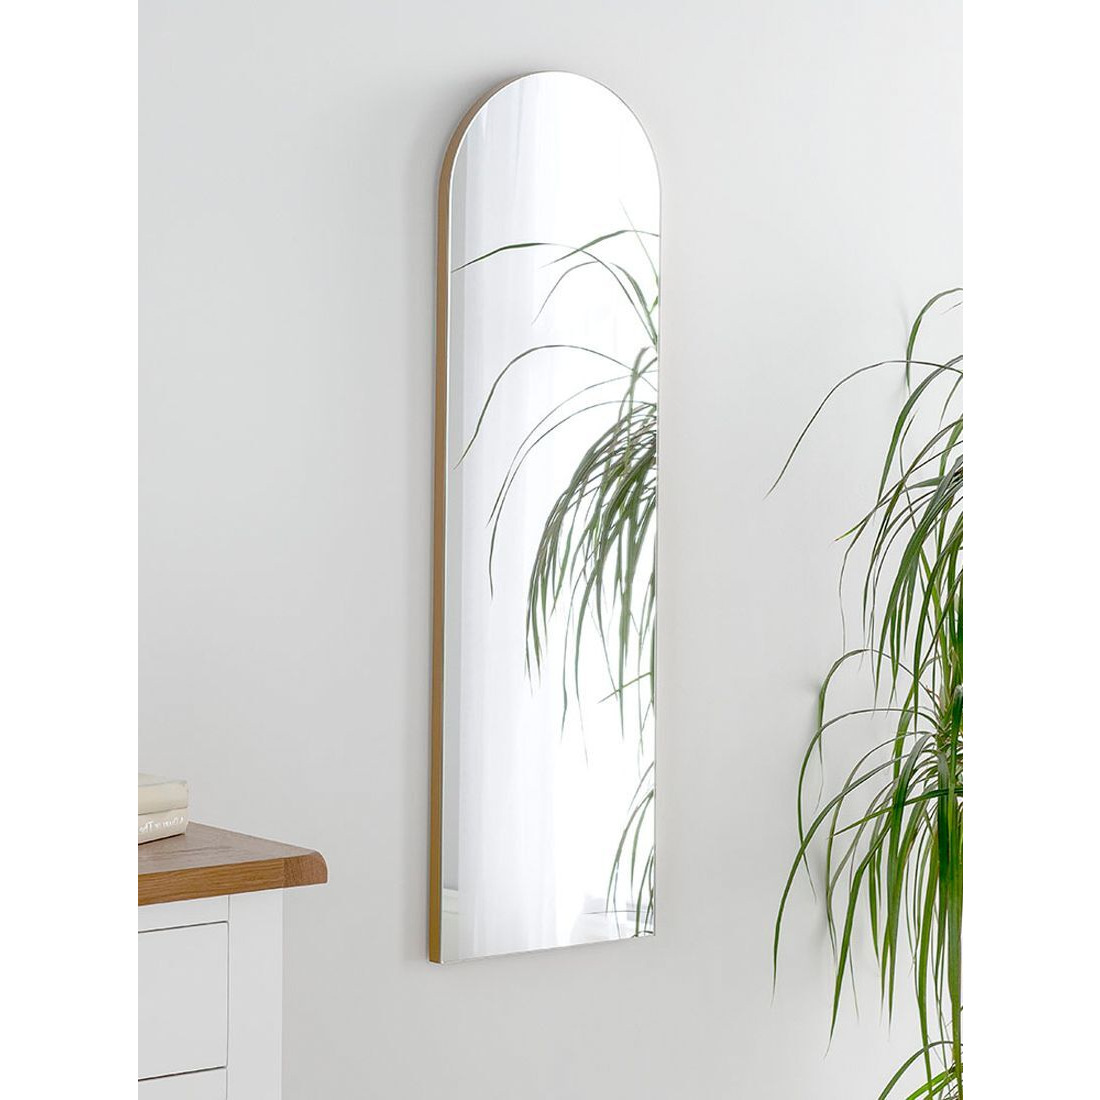 Yearn Delicacy Arched Wood Frame Wall Mirror, Gold, 100 x 30cm - image 1